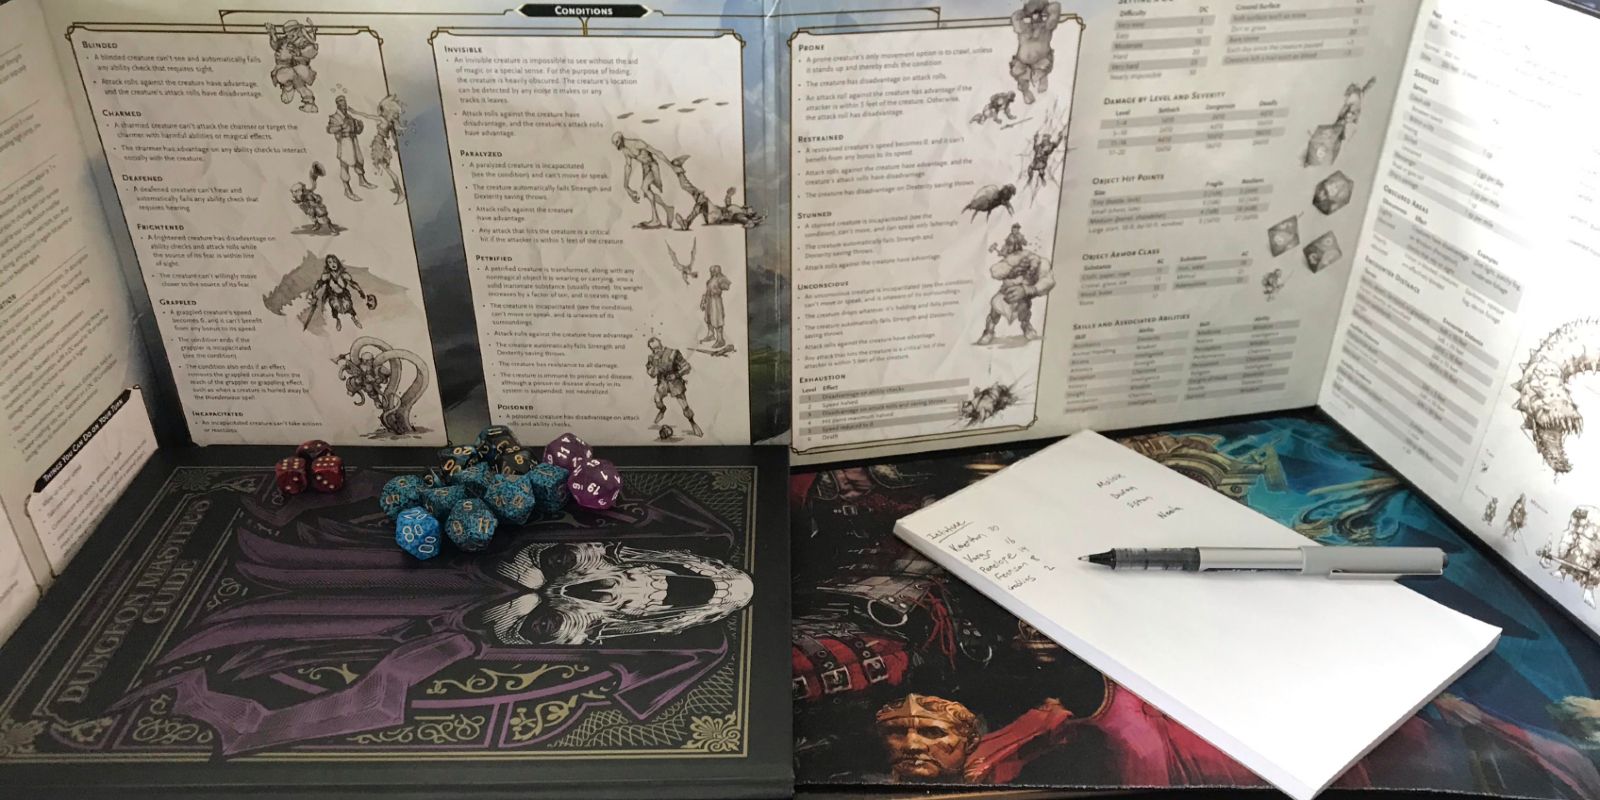 An image of various DM resources for playing Dungeons and Dragons